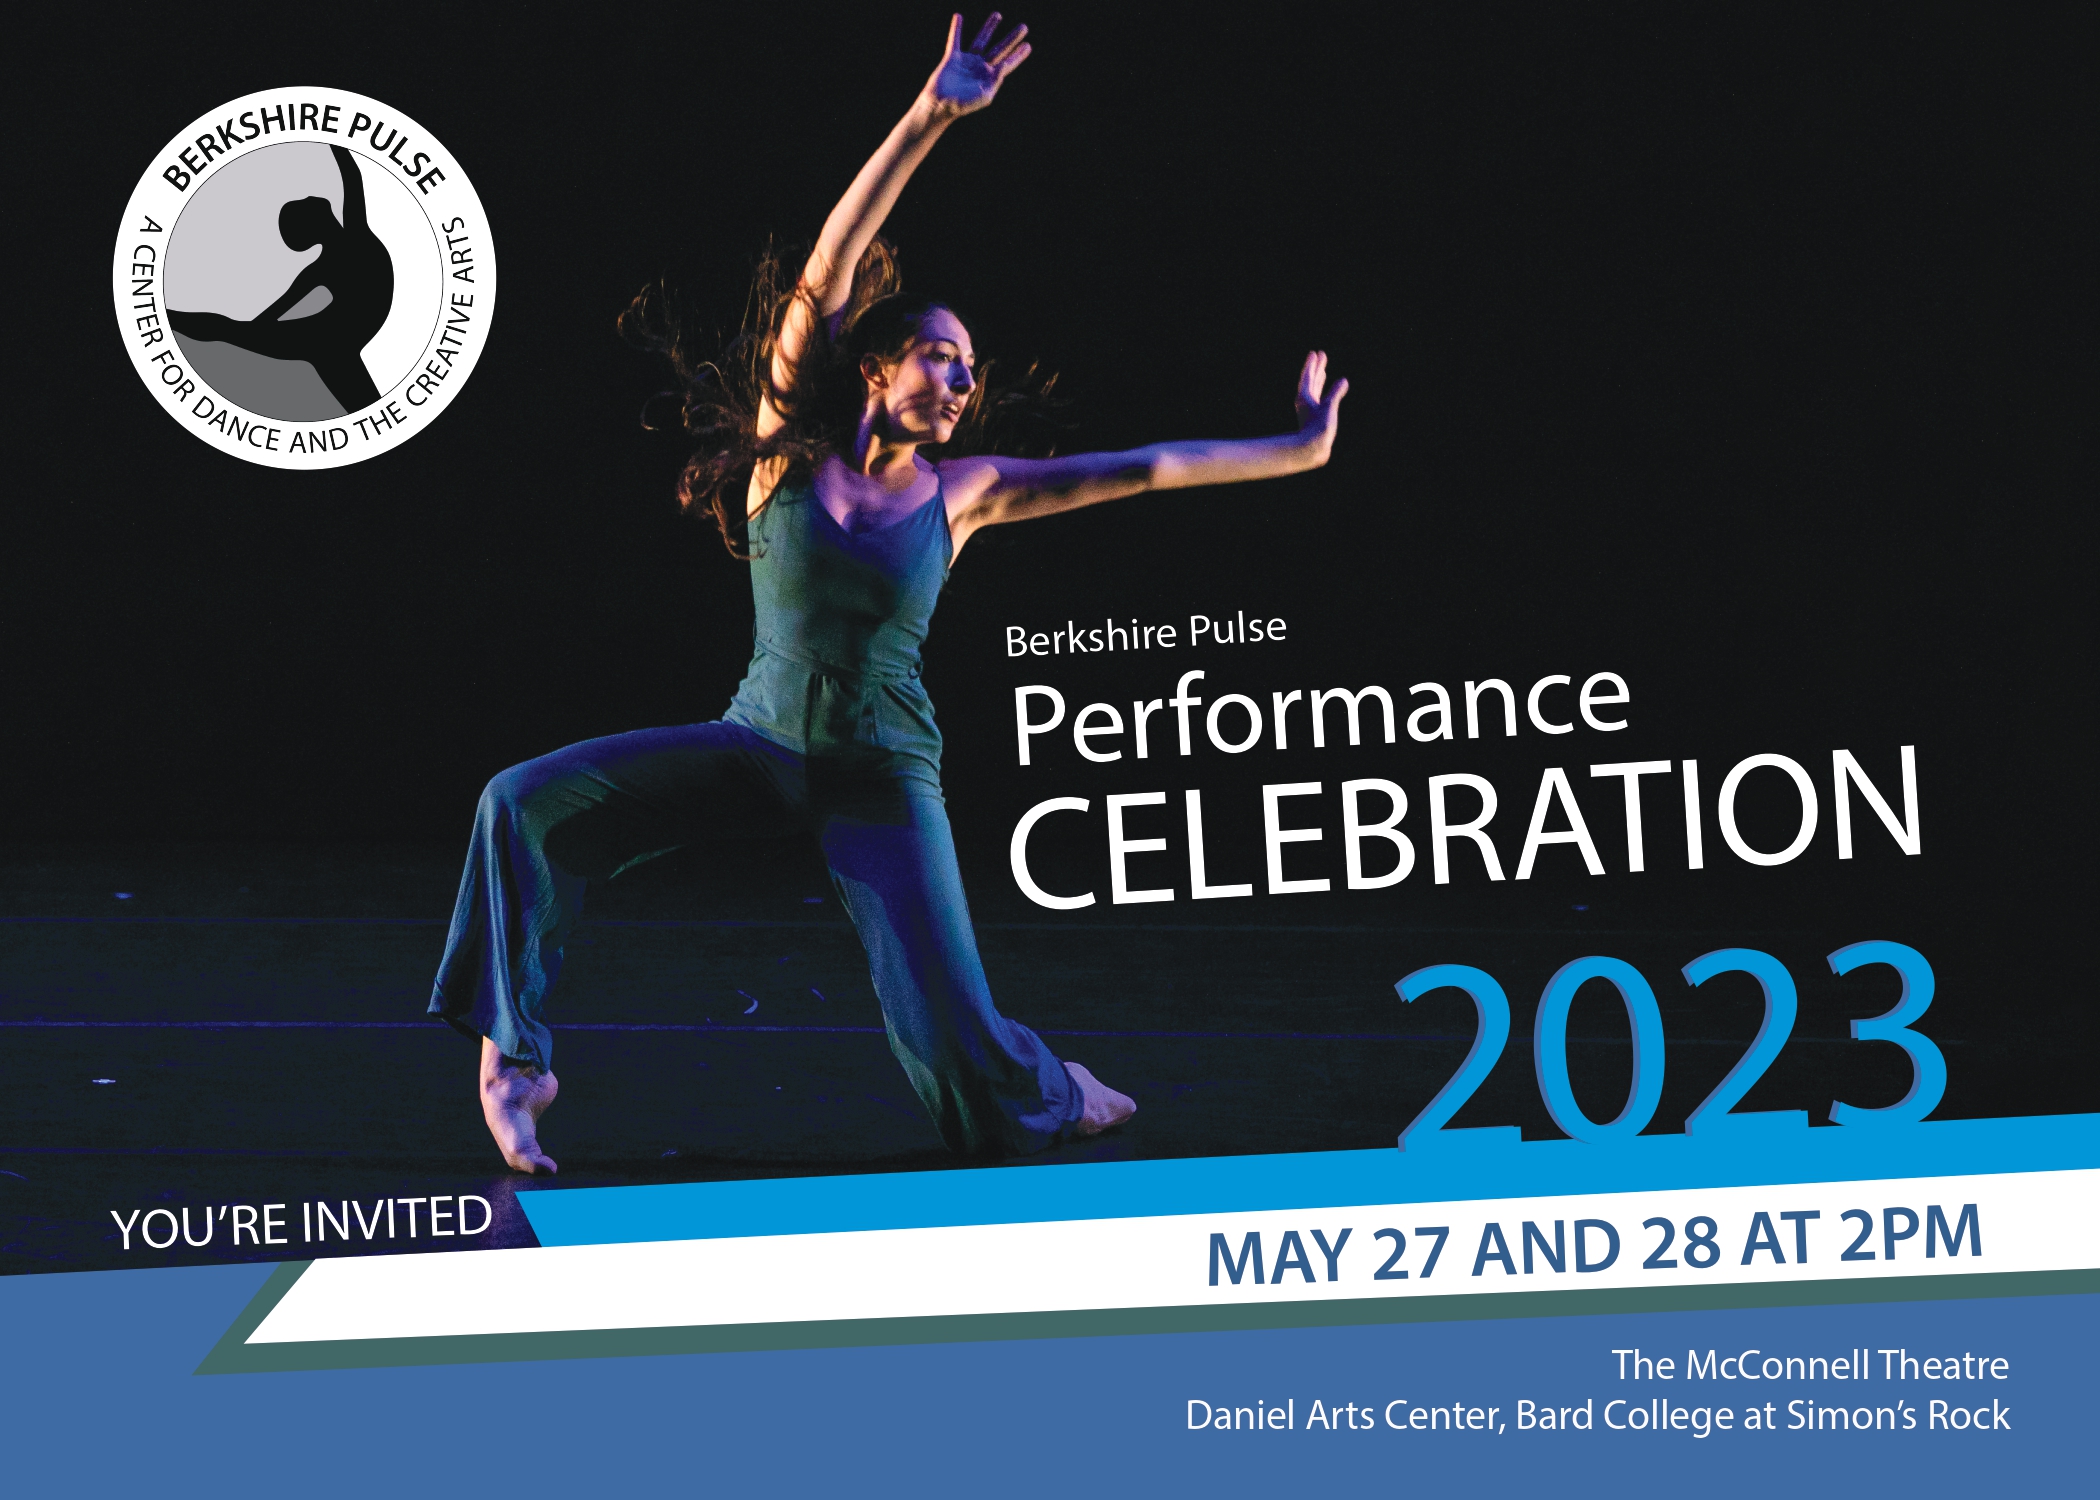 A graphic with an invitation to Berkshire Pulse's Annual Celebration on May 27 & 28 at the Daniel Arts Center at Simon's Rock.